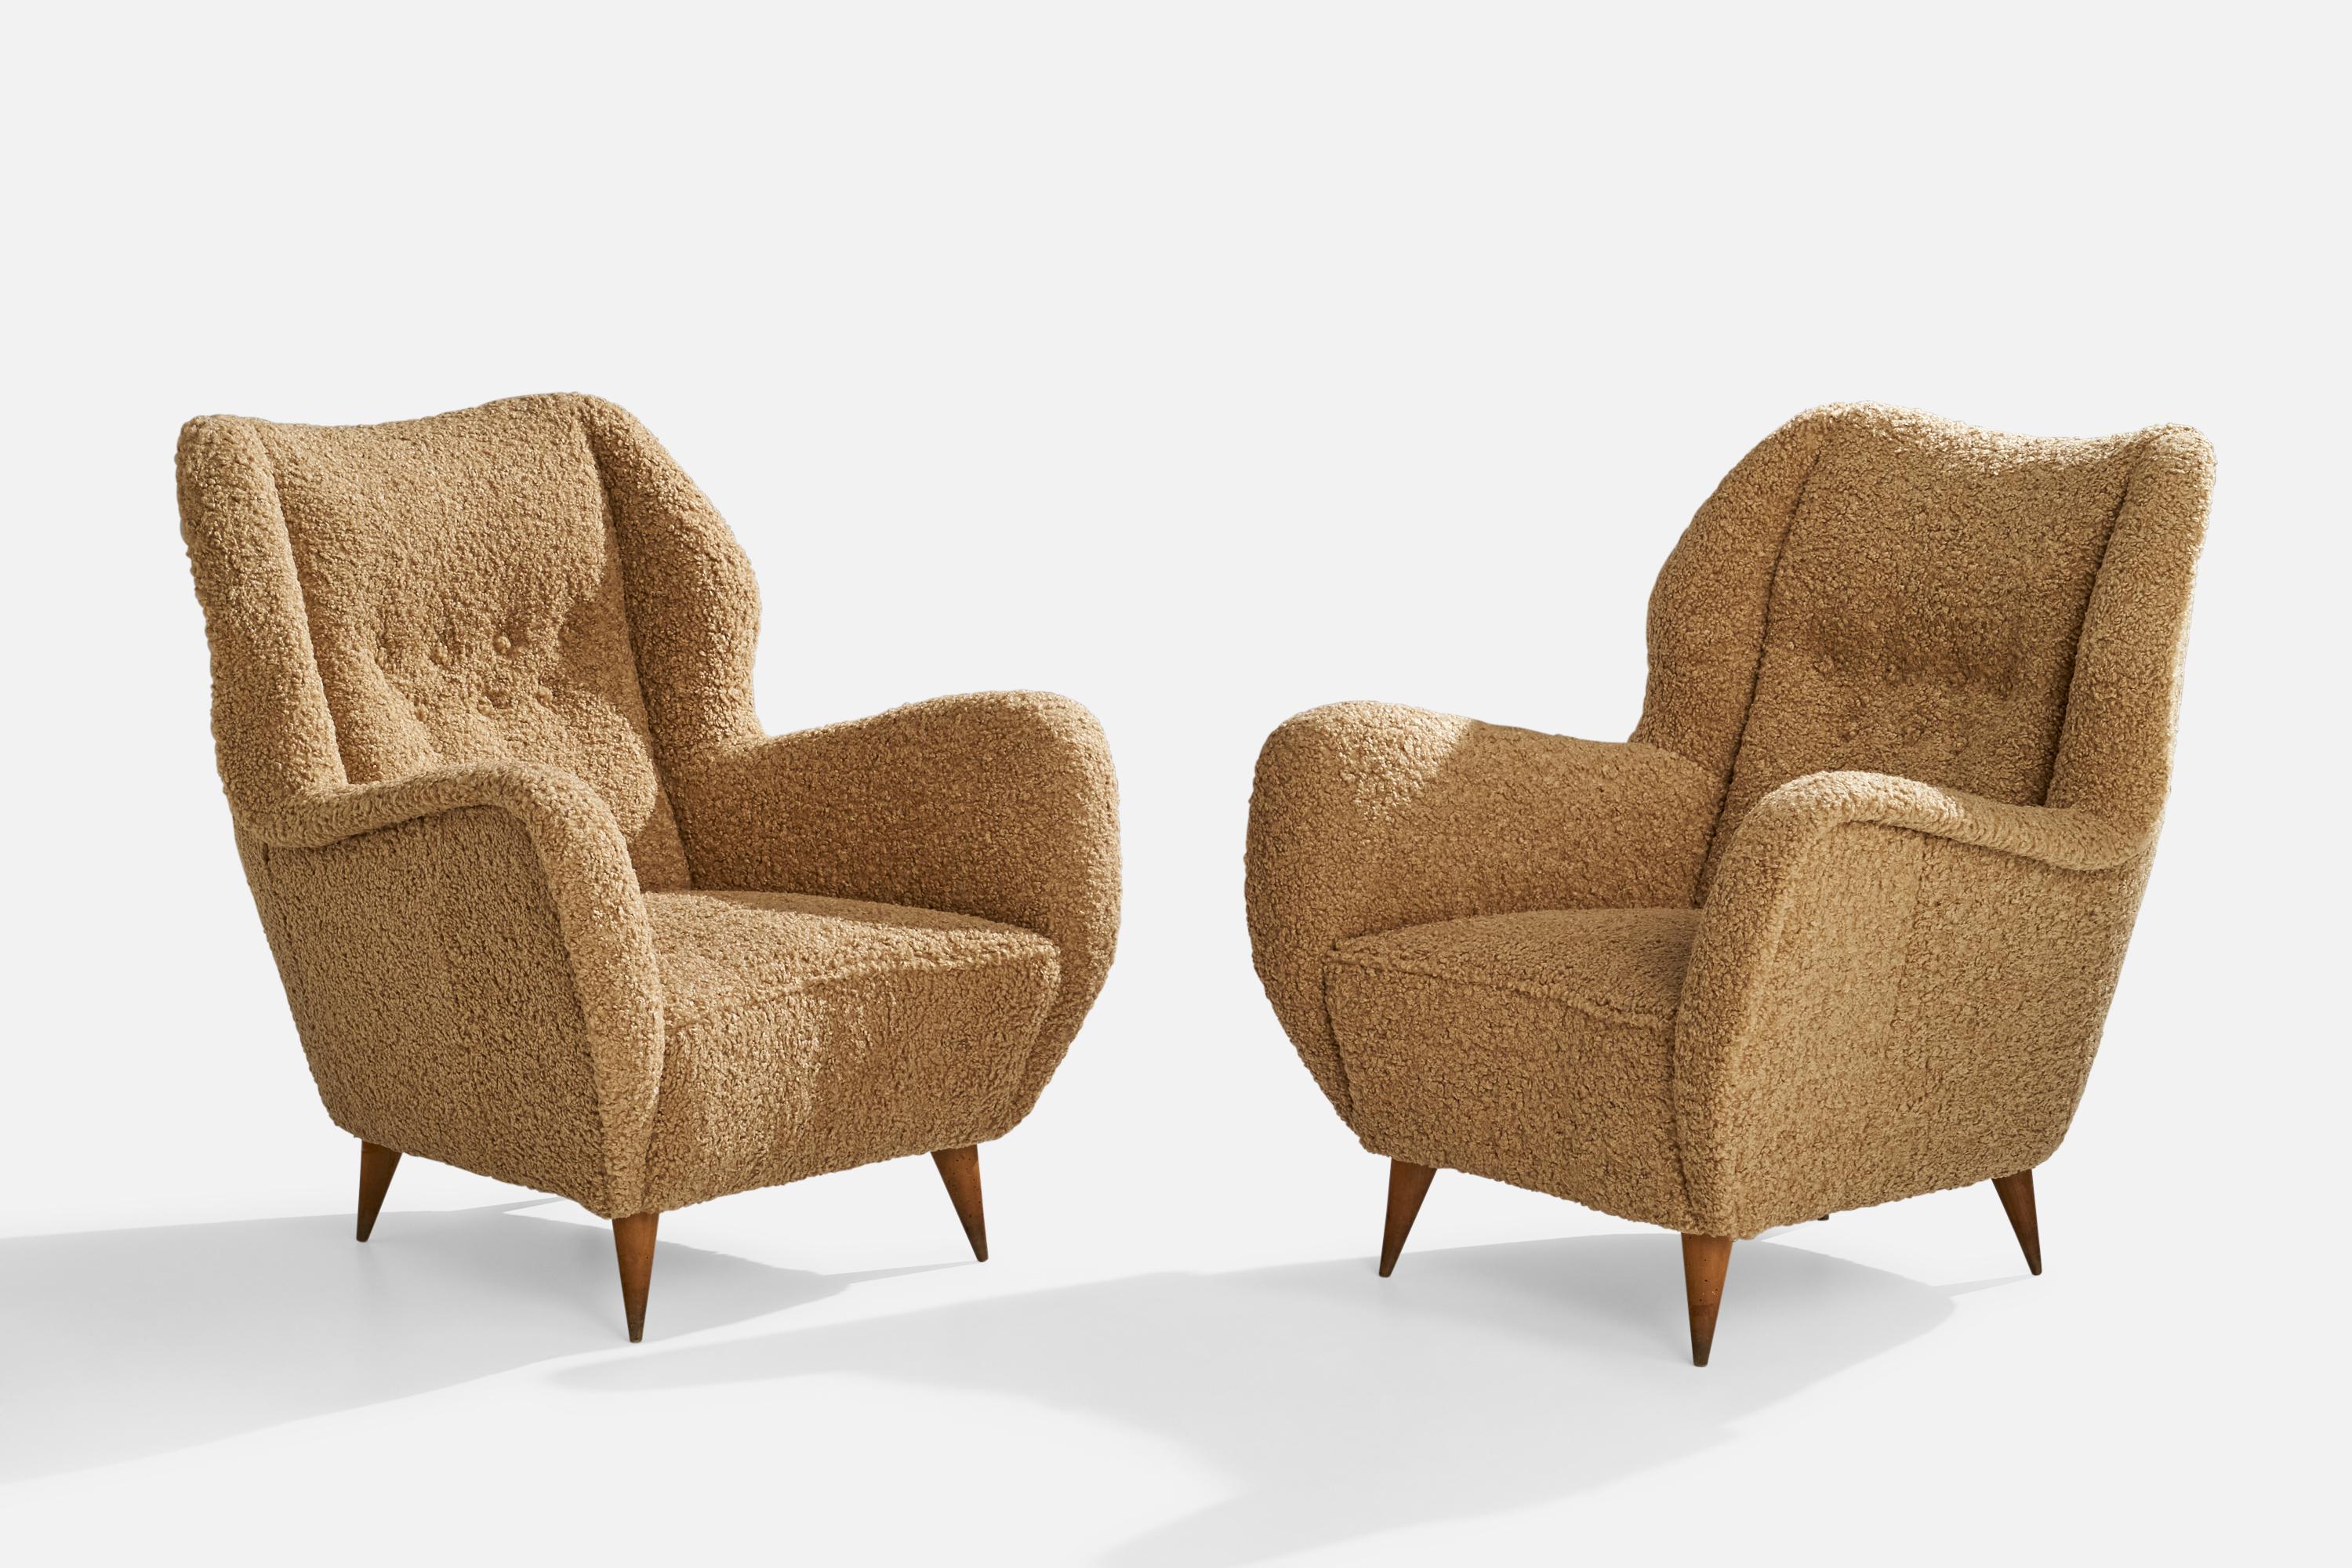 A pair of brown beige bouclé fabric and wood lounge chairs designed and produced in Italy, c. 1940s.

Seat height 15”